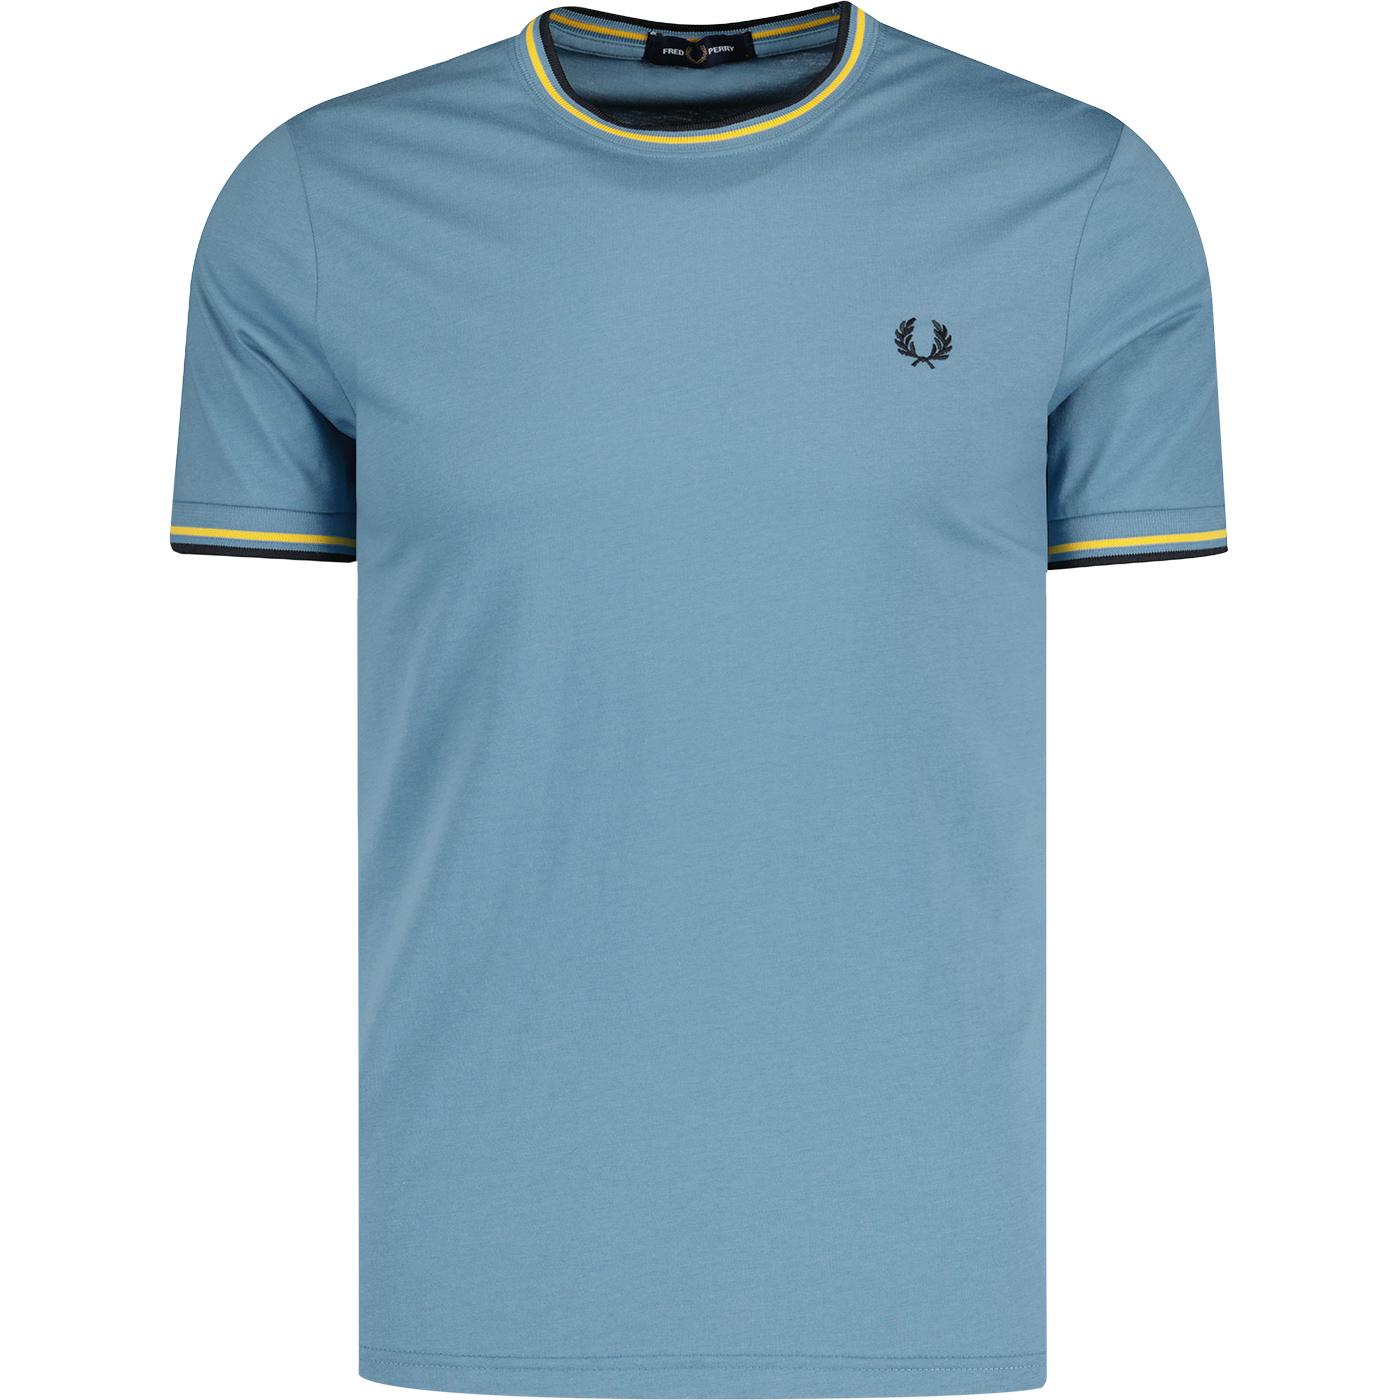 M1588 Fred Perry Mod Twin Tipped T-shirt Ash Blue